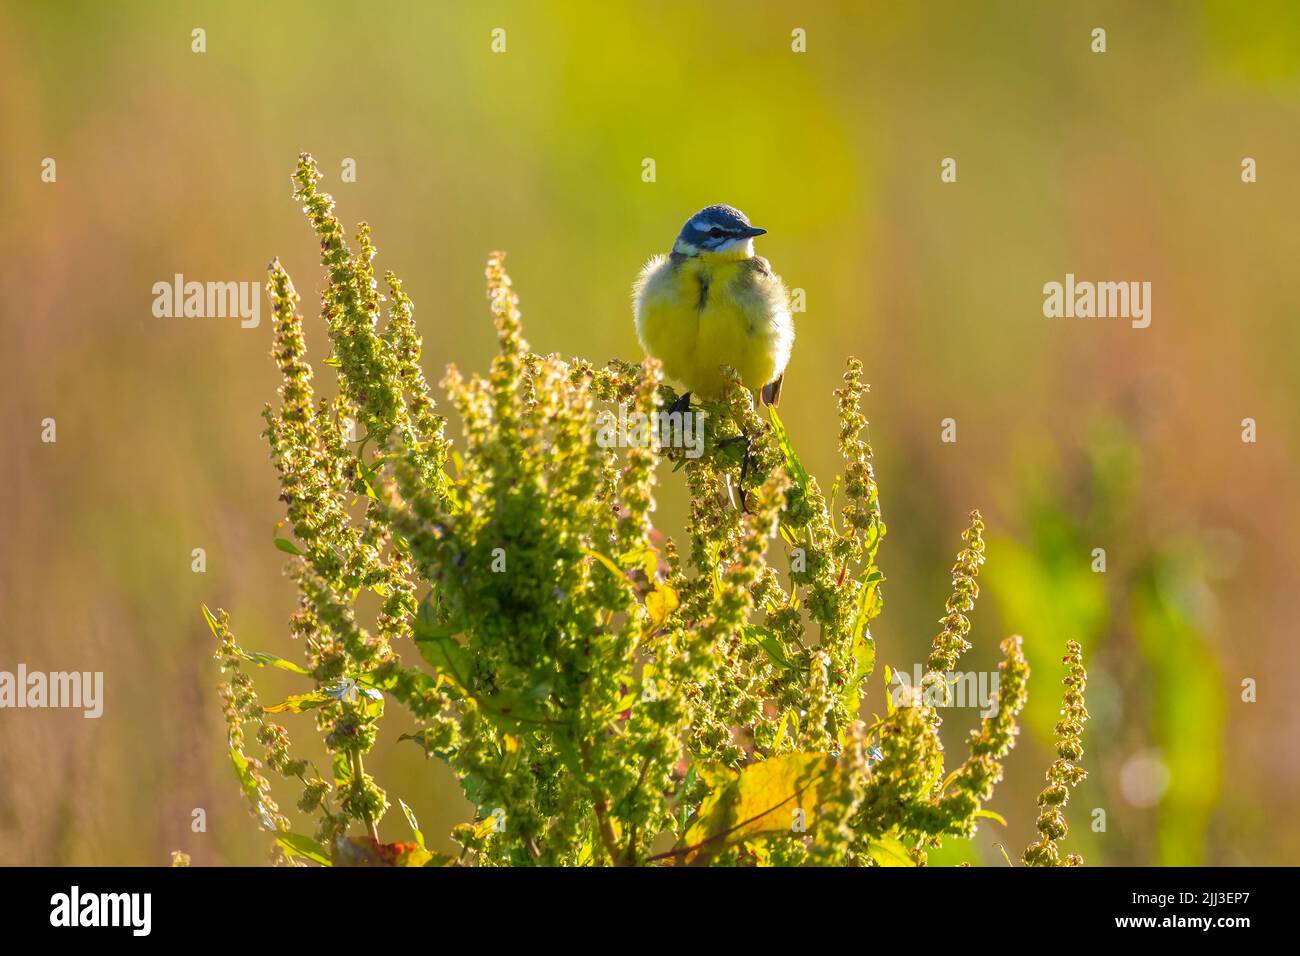 Closeup of a male western yellow wagtail bird Motacilla flava singing in vegetation on a sunny day during spring season. Stock Photo